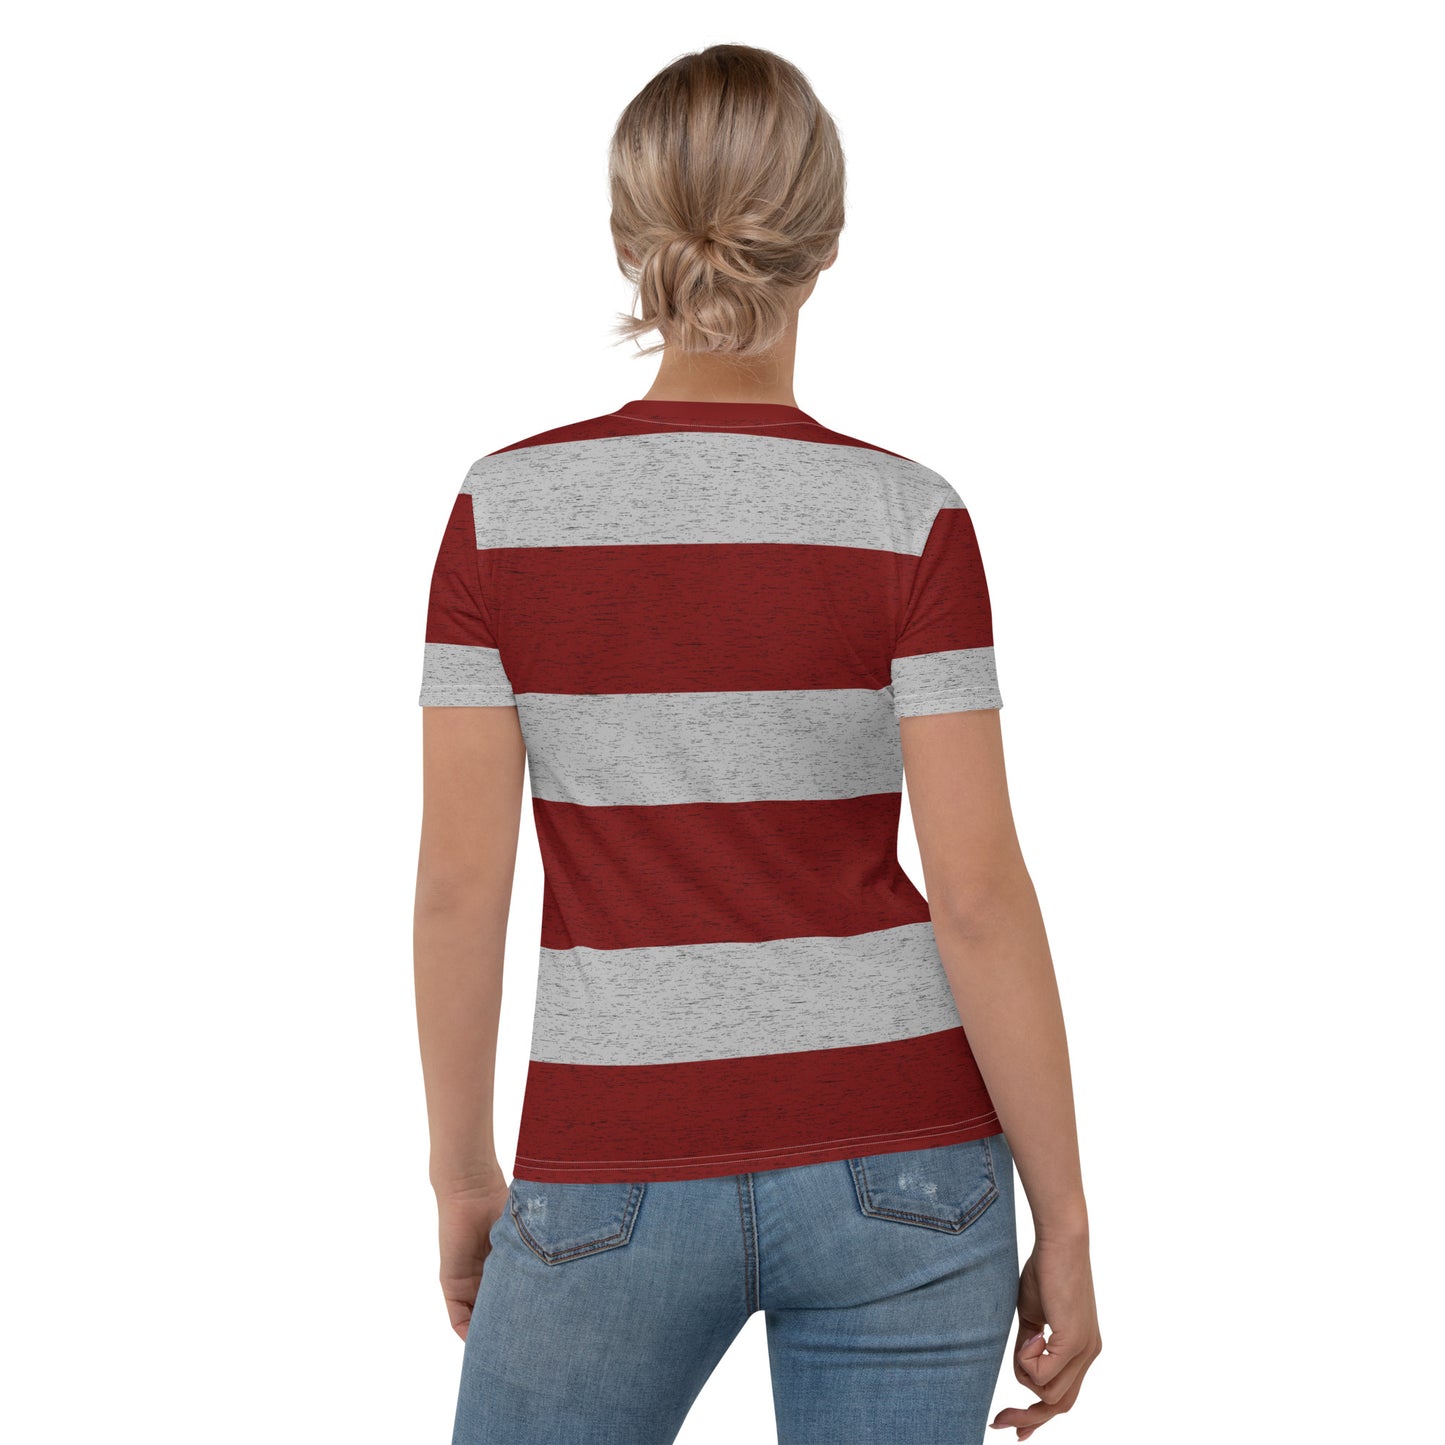 Mezzotint - Inspired By Taylor Swift - Sustainably Made Women’s Short Sleeve Tee